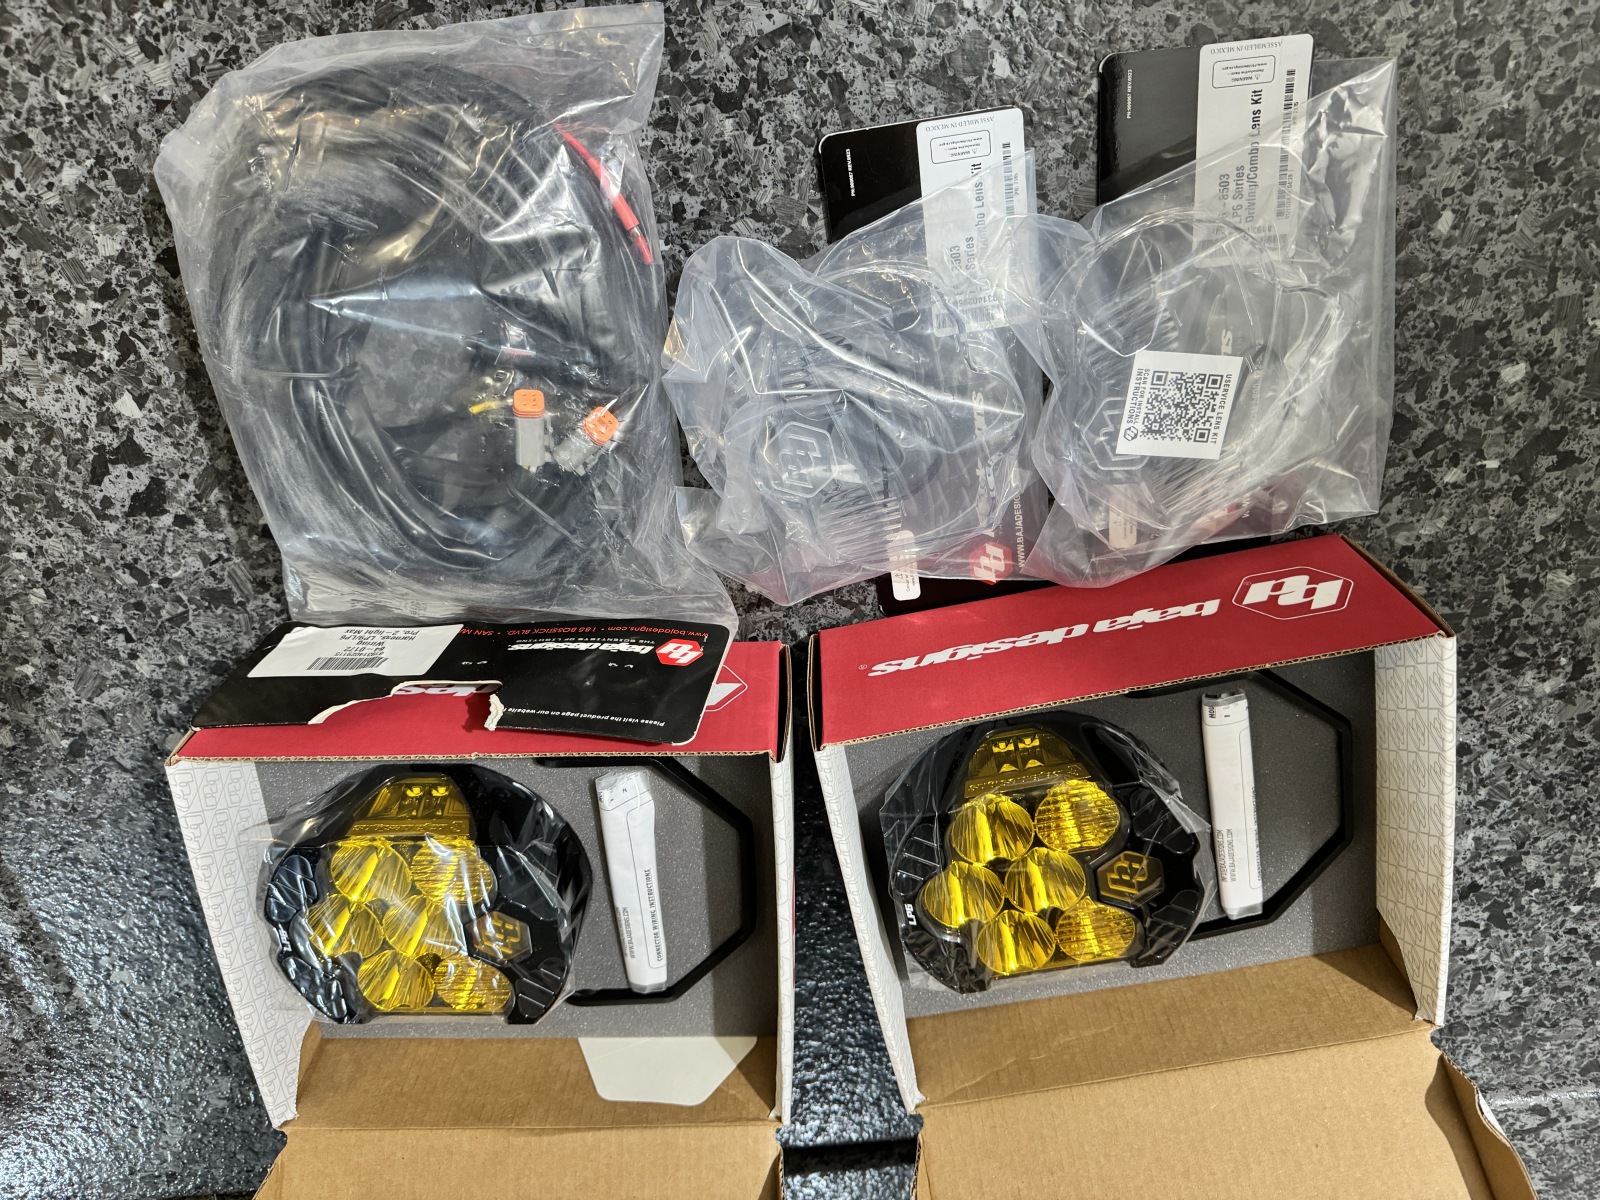 For Sale: Baja Designs LP6s w/ spare lenses and harness  - photo0